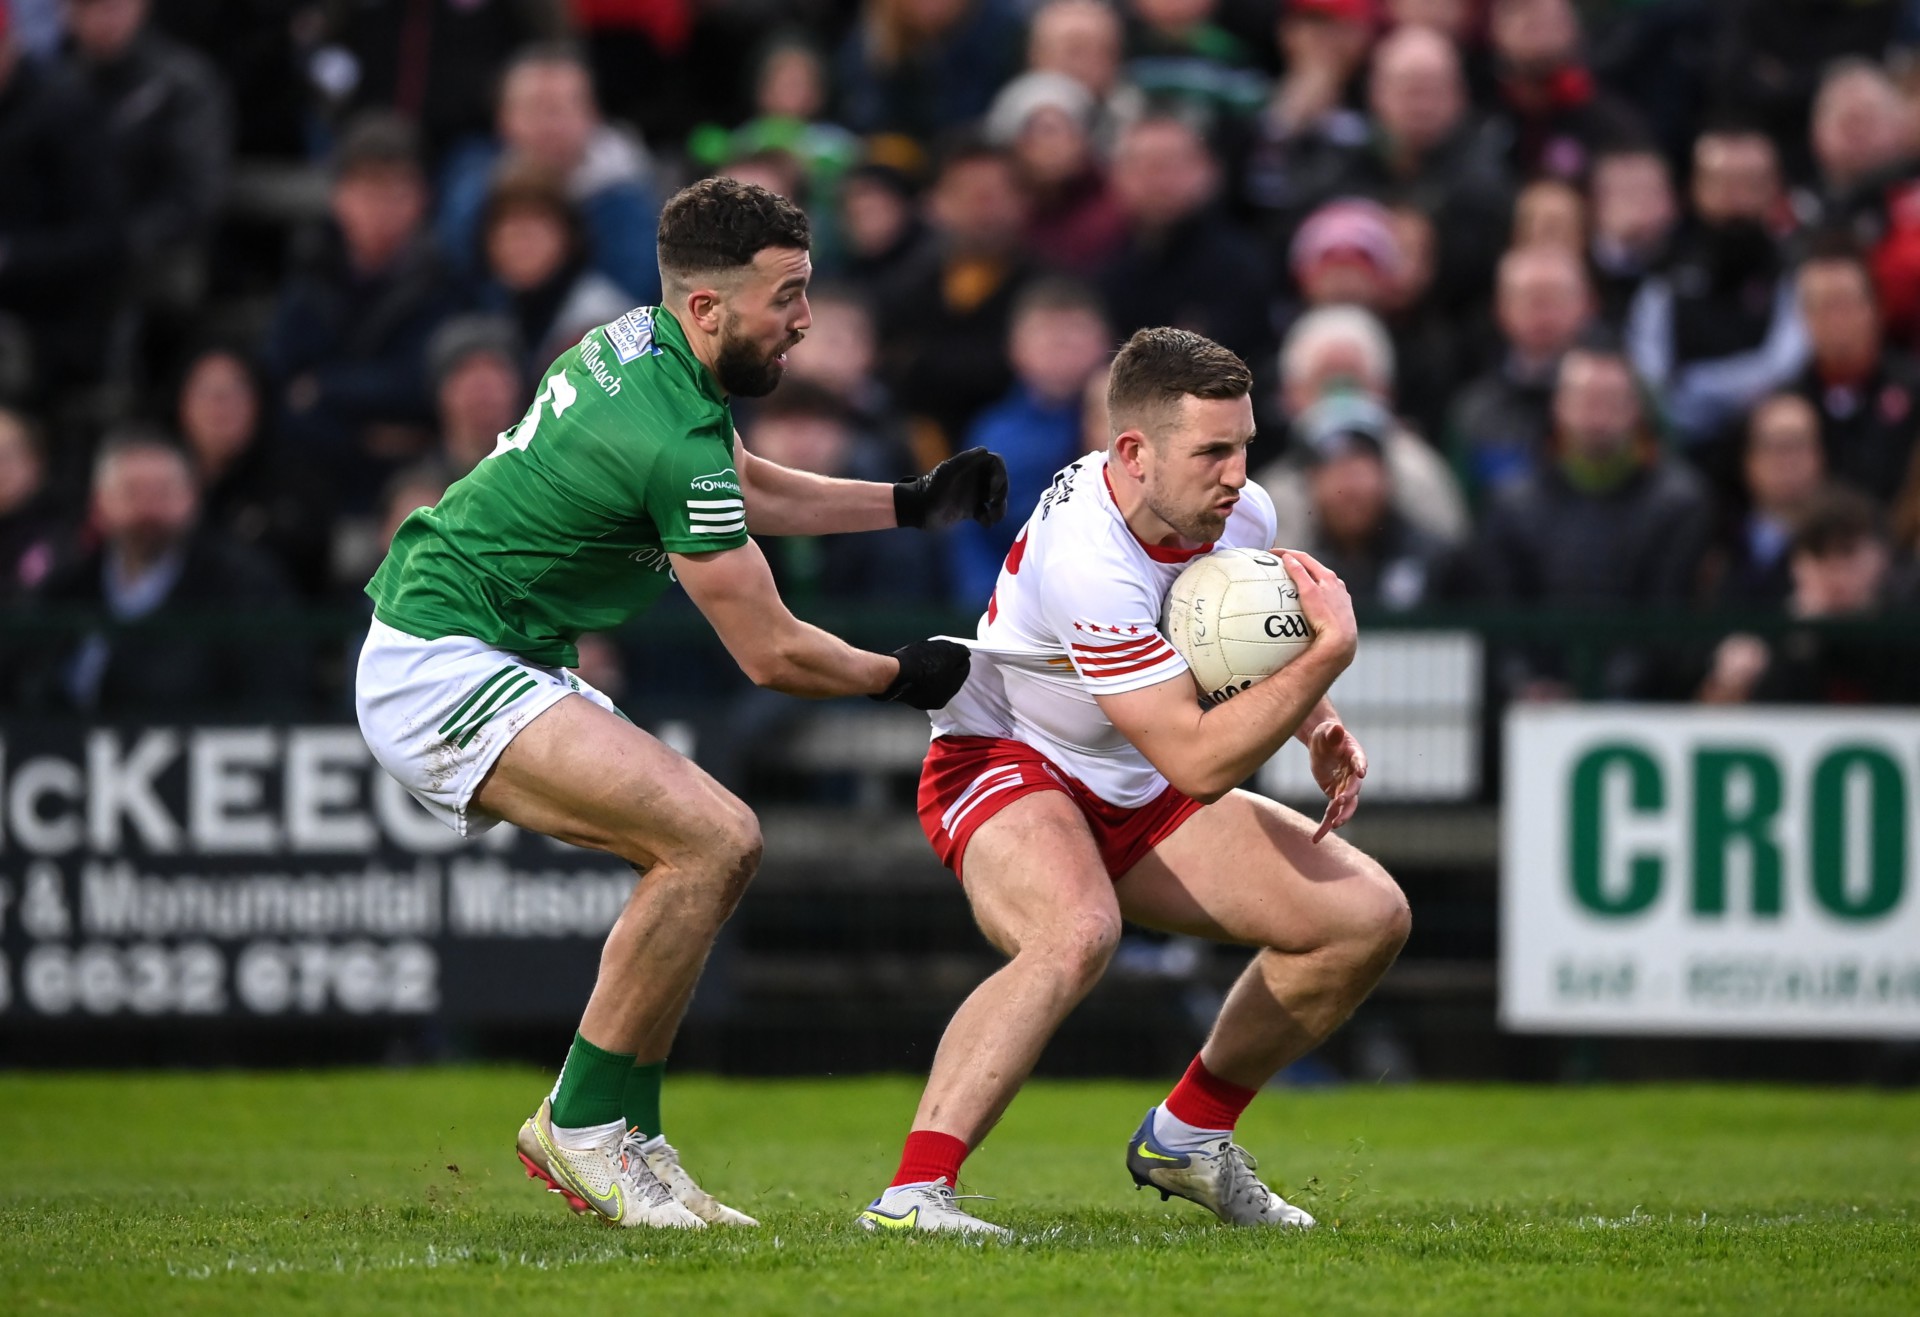 Sludden hungry for more after success on club and county front in 2021